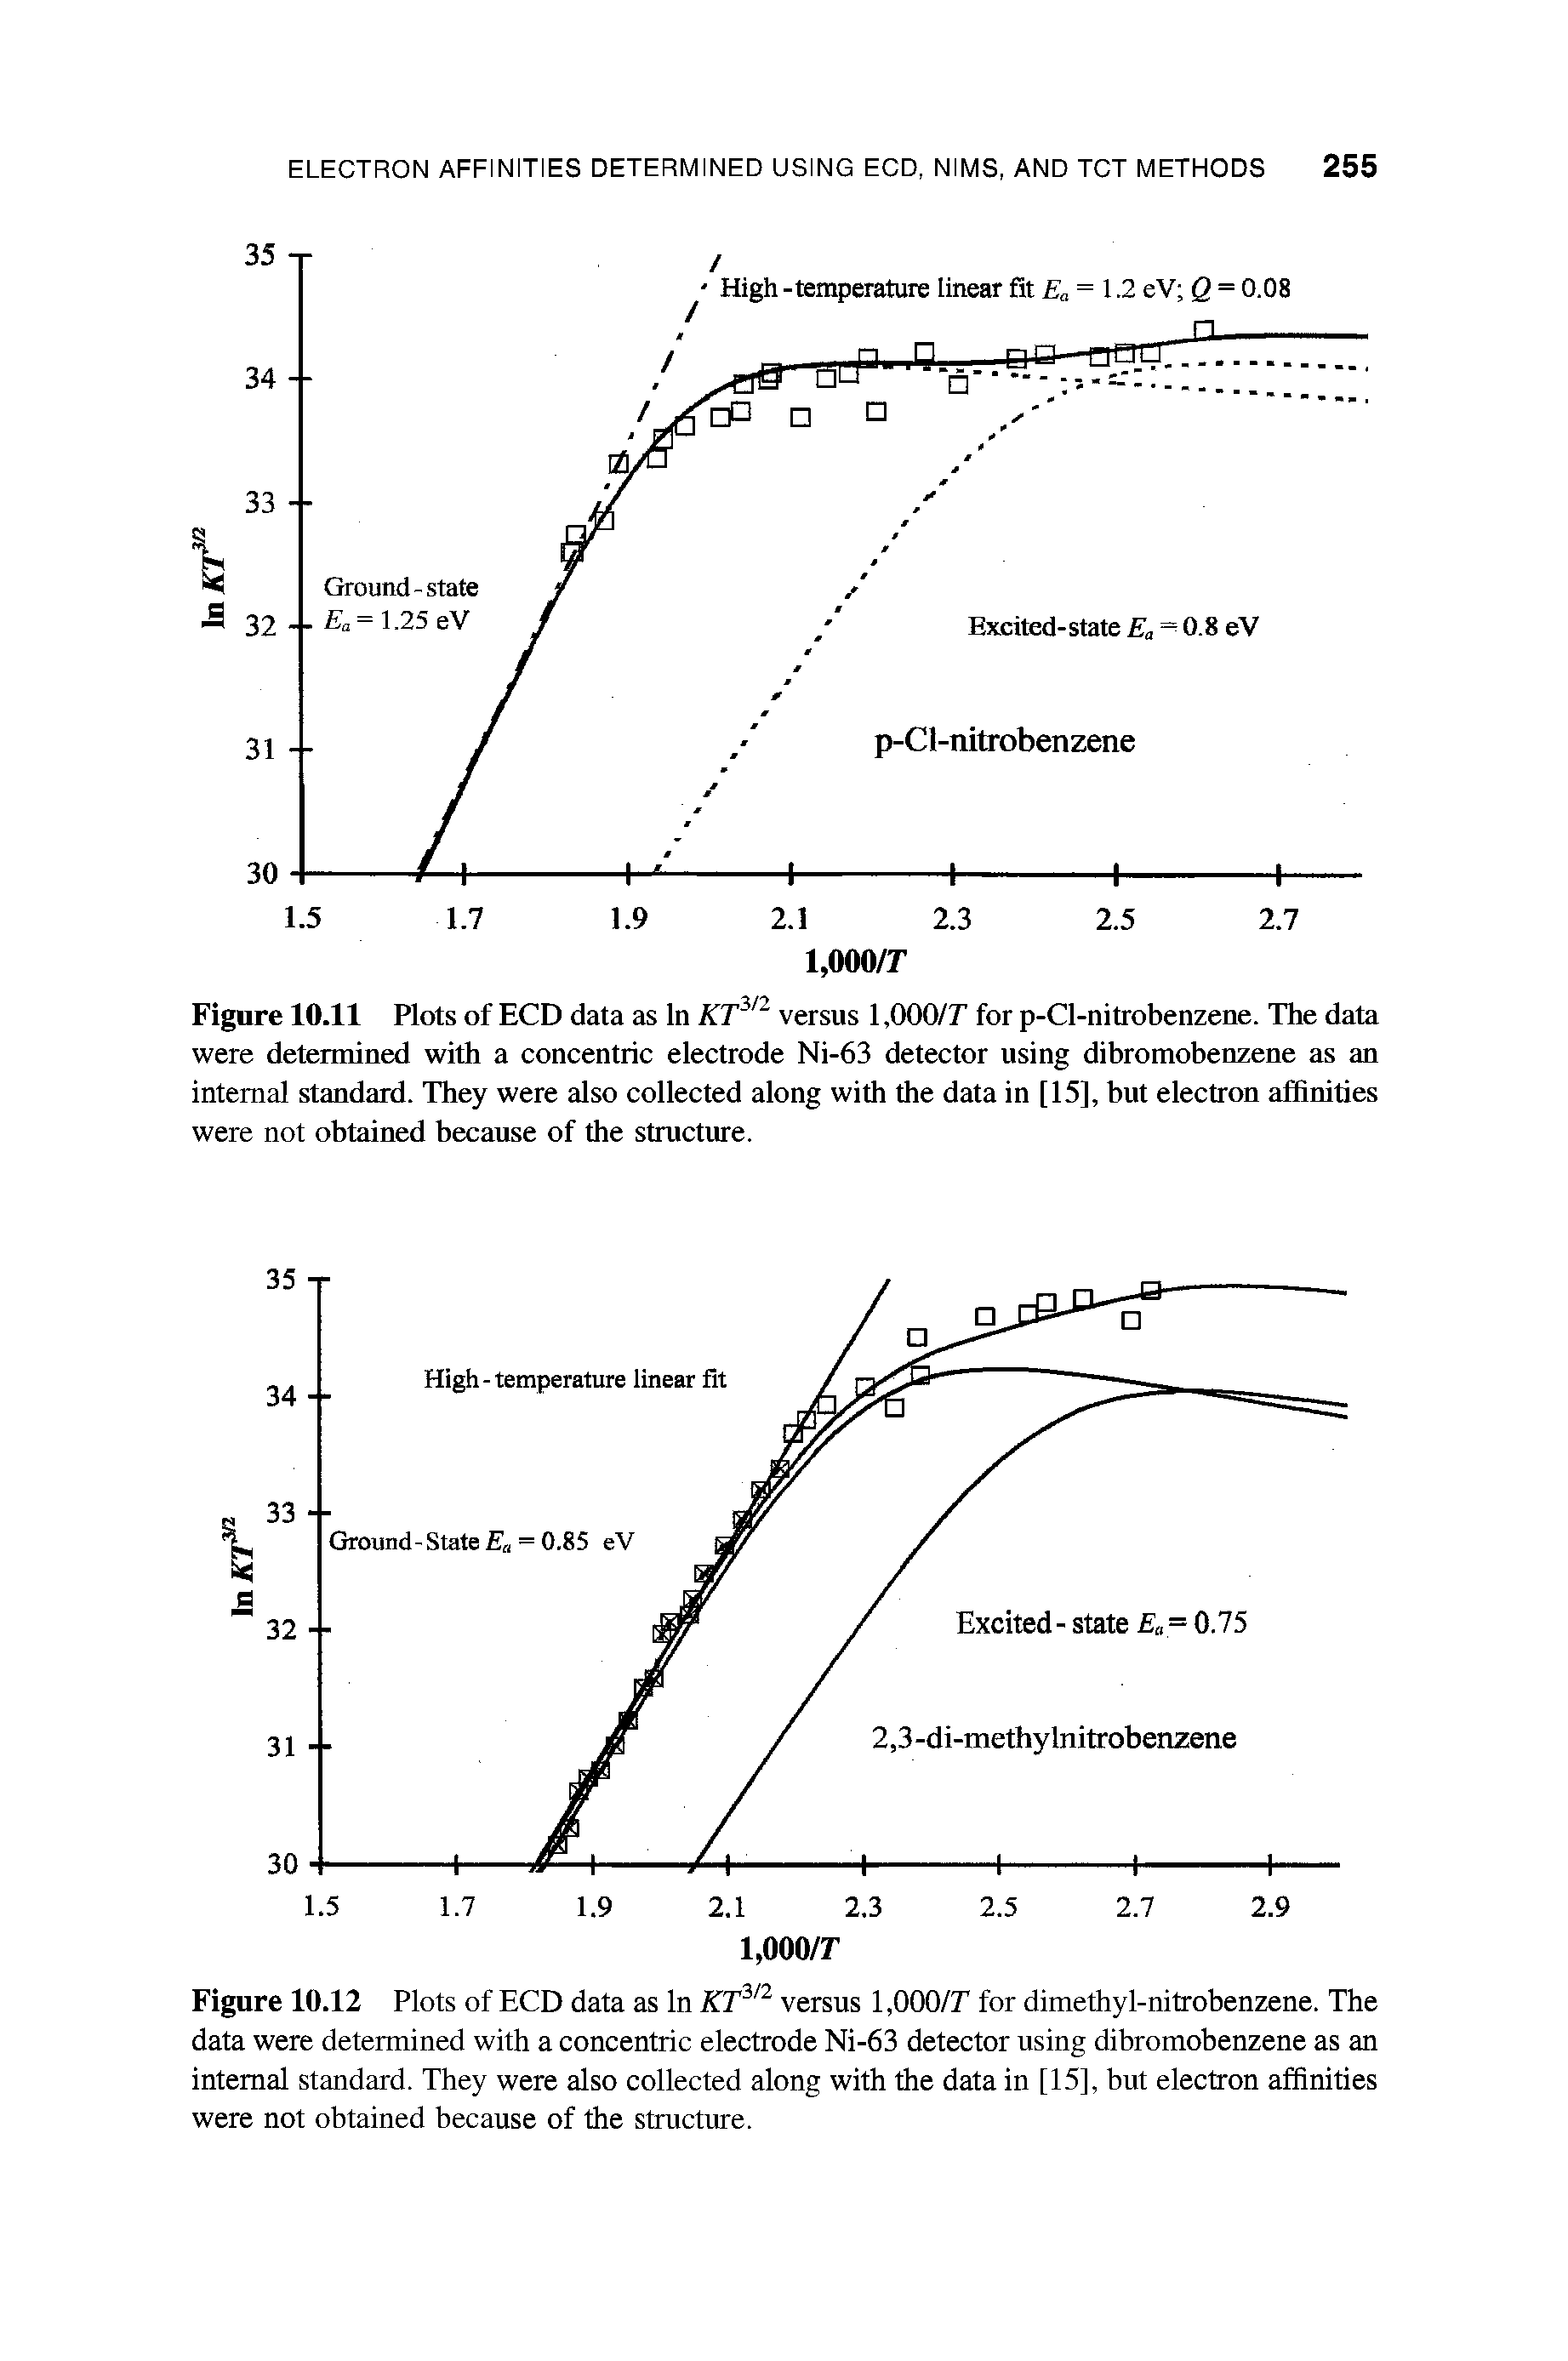 Figure 10.12 Plots of ECD data as In KT3/2 versus 1,000/T for dimethyl-nitrobenzene. The data were determined with a concentric electrode Ni-63 detector using dibromobenzene as an internal standard. They were also collected along with the data in [15], but electron affinities were not obtained because of the structure.